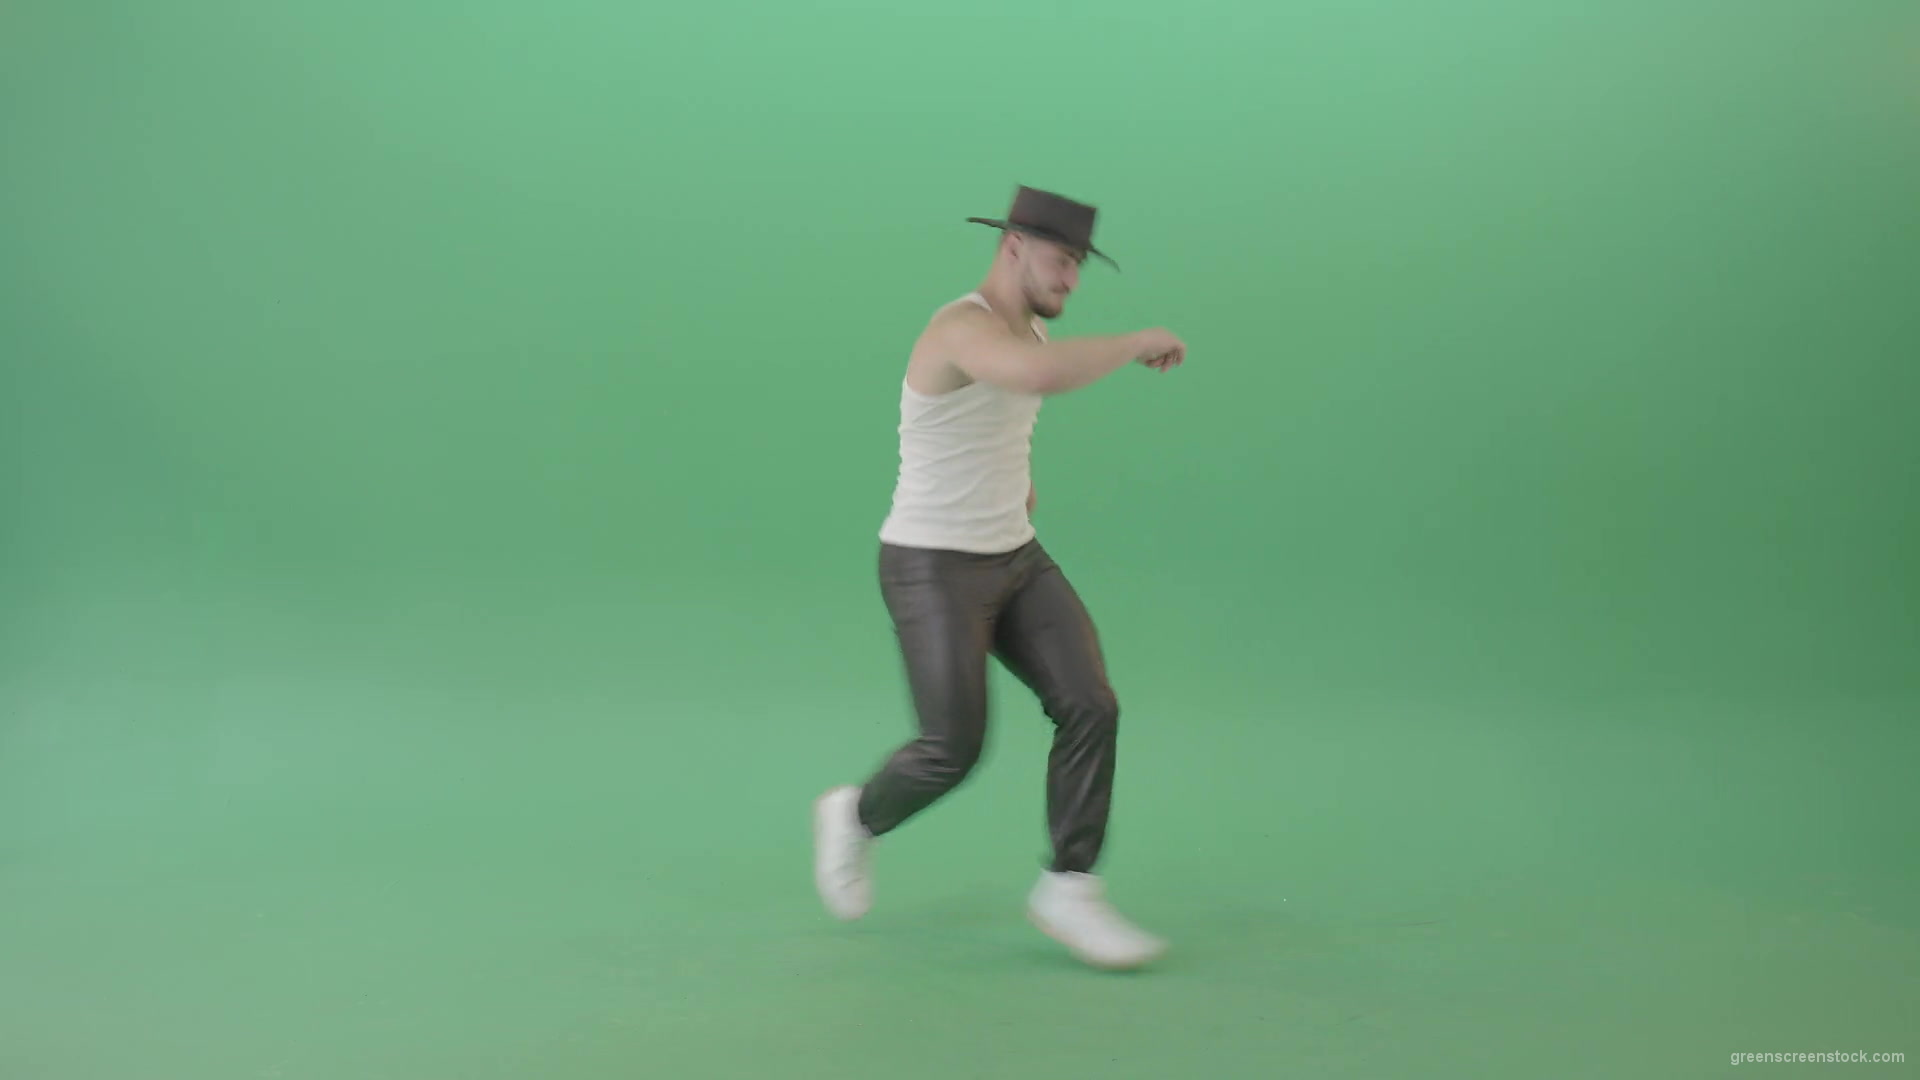 Man-dancing-popping-street-dance-and-makes-Michael-Jackson-Elements-isolated-on-Green-Screen-4K-Video-Footage-1920_005 Green Screen Stock